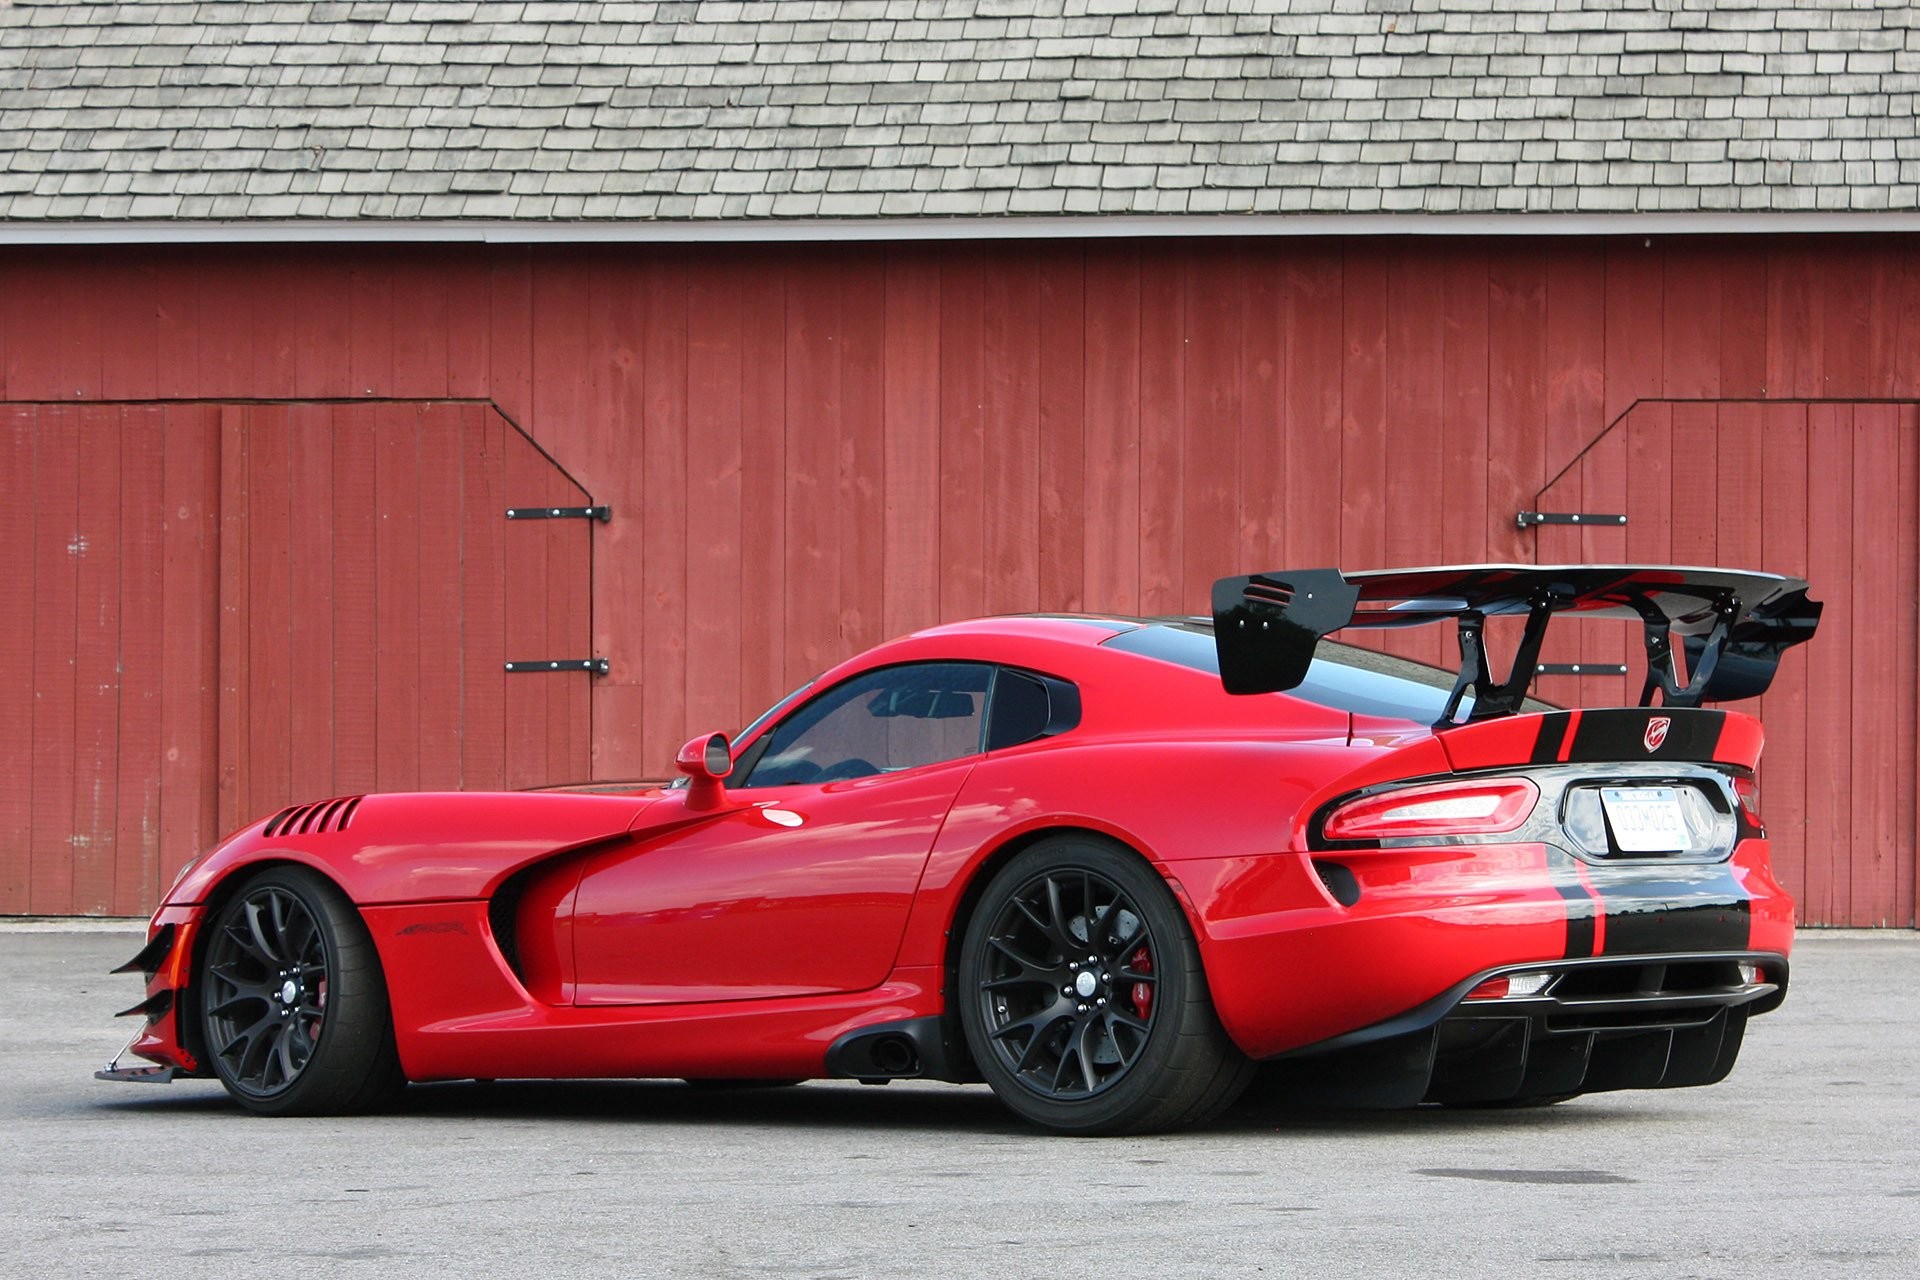 Dodge Viper ACR features, overview, equipment and prices